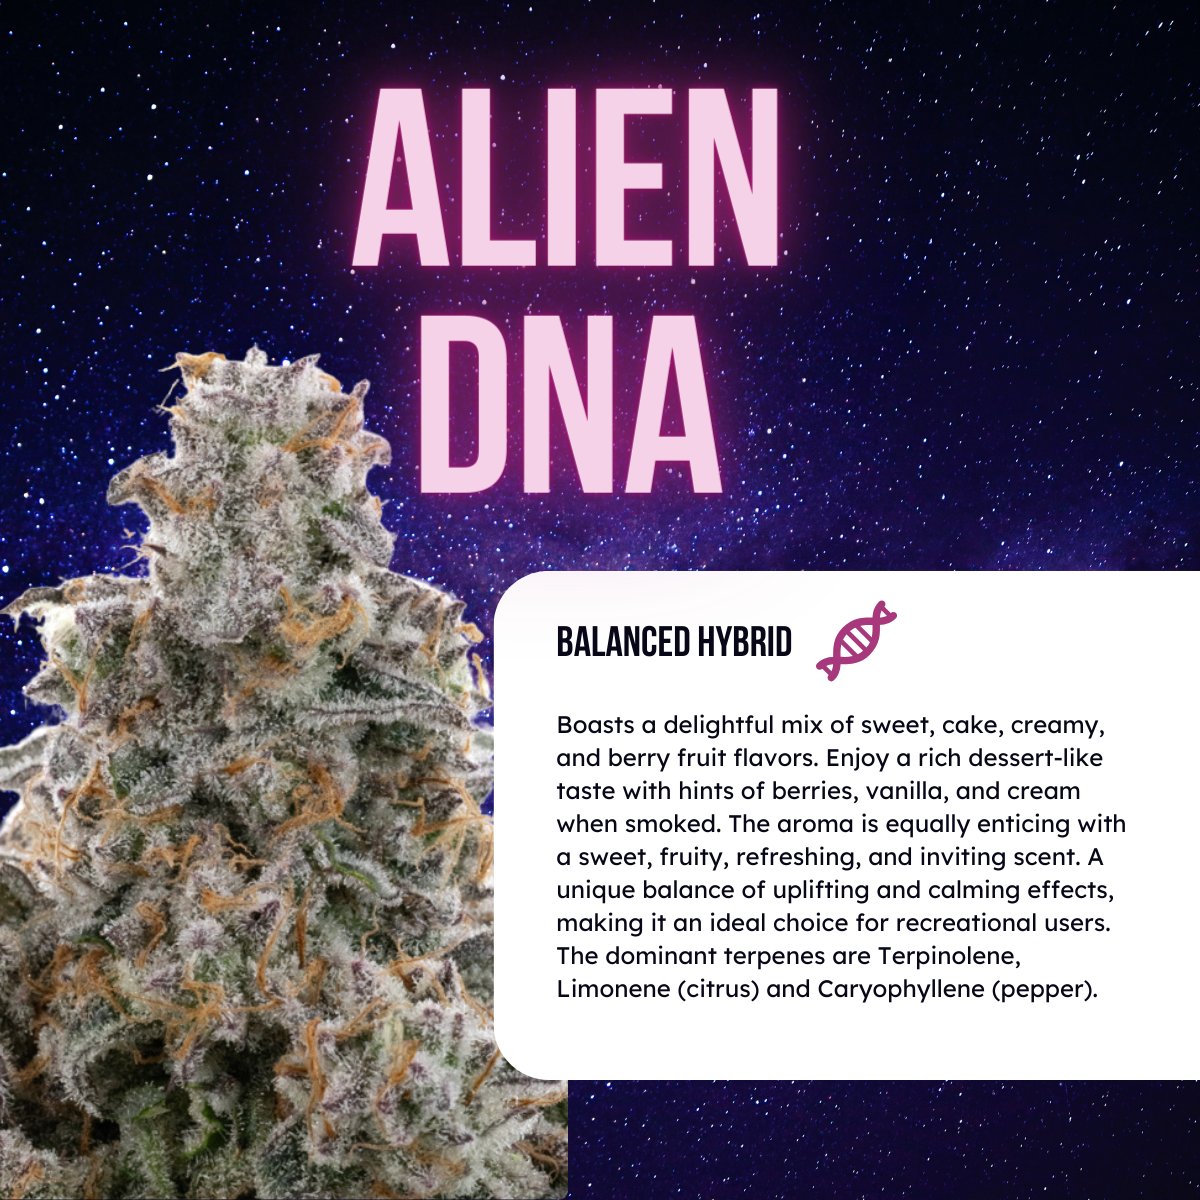 (4/5) Alien DNA 🧬 #BalancedHybrid

#GalaxyCannabisLaunch #GalaxyAtmosphere #CannabisIndustry #SocialEquity #VeteranOwned #BlackOwned #WomenOwned #CannabisCommunity #CannabisCulture #CannabisIllinois #OutThereFromHere